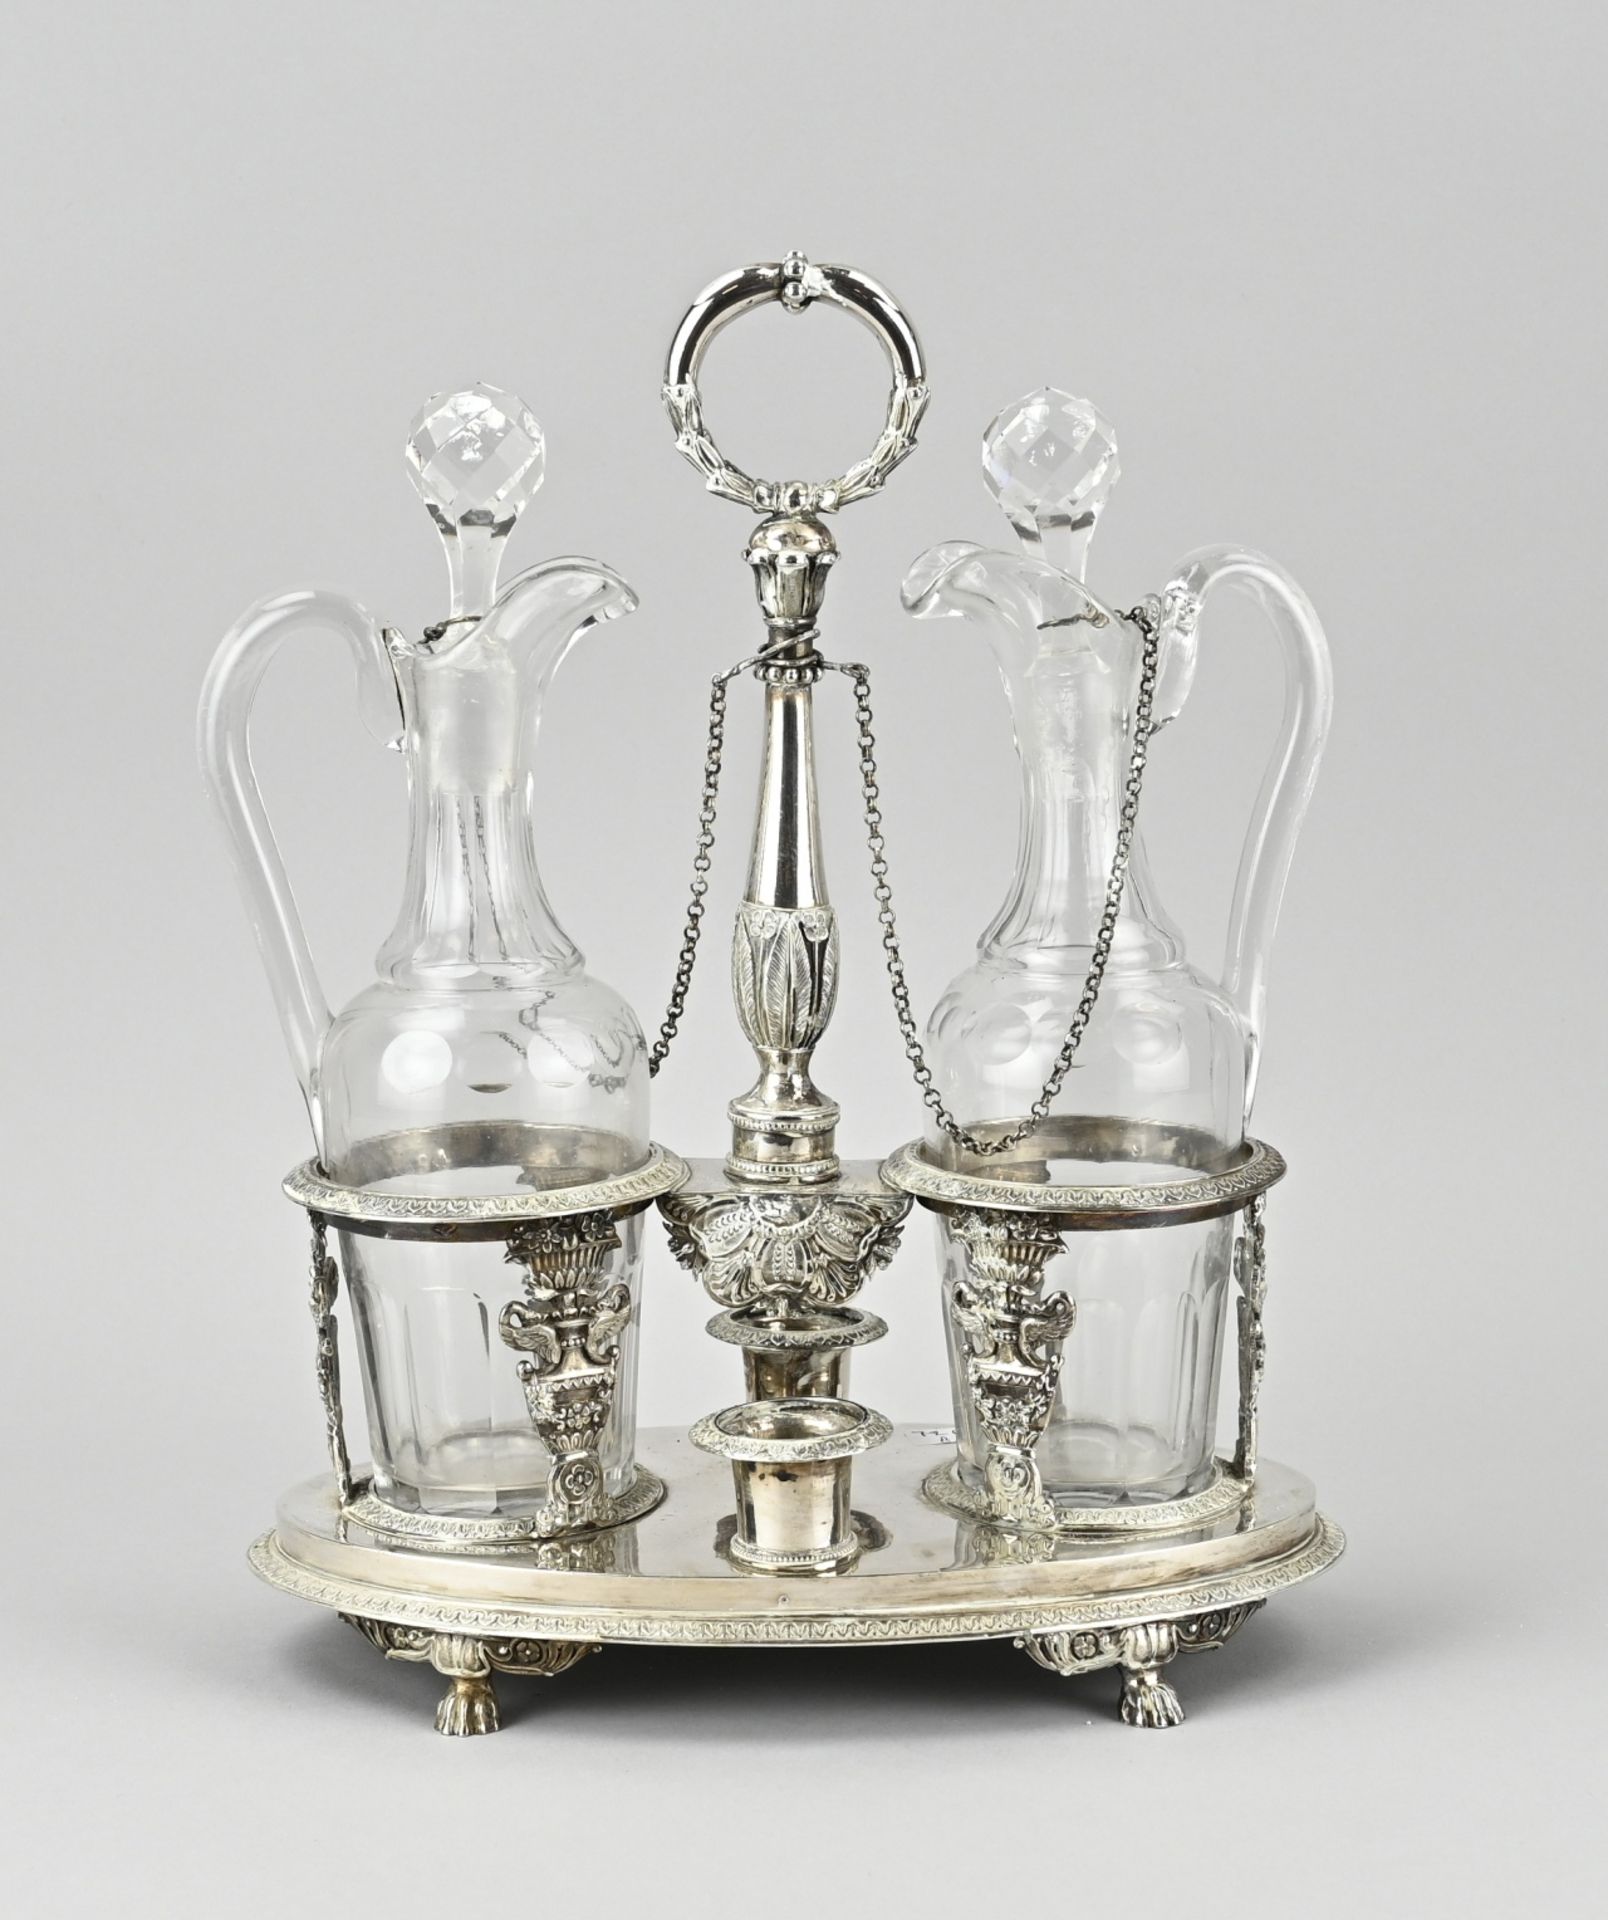 Table set with 2 decanters in silver holder